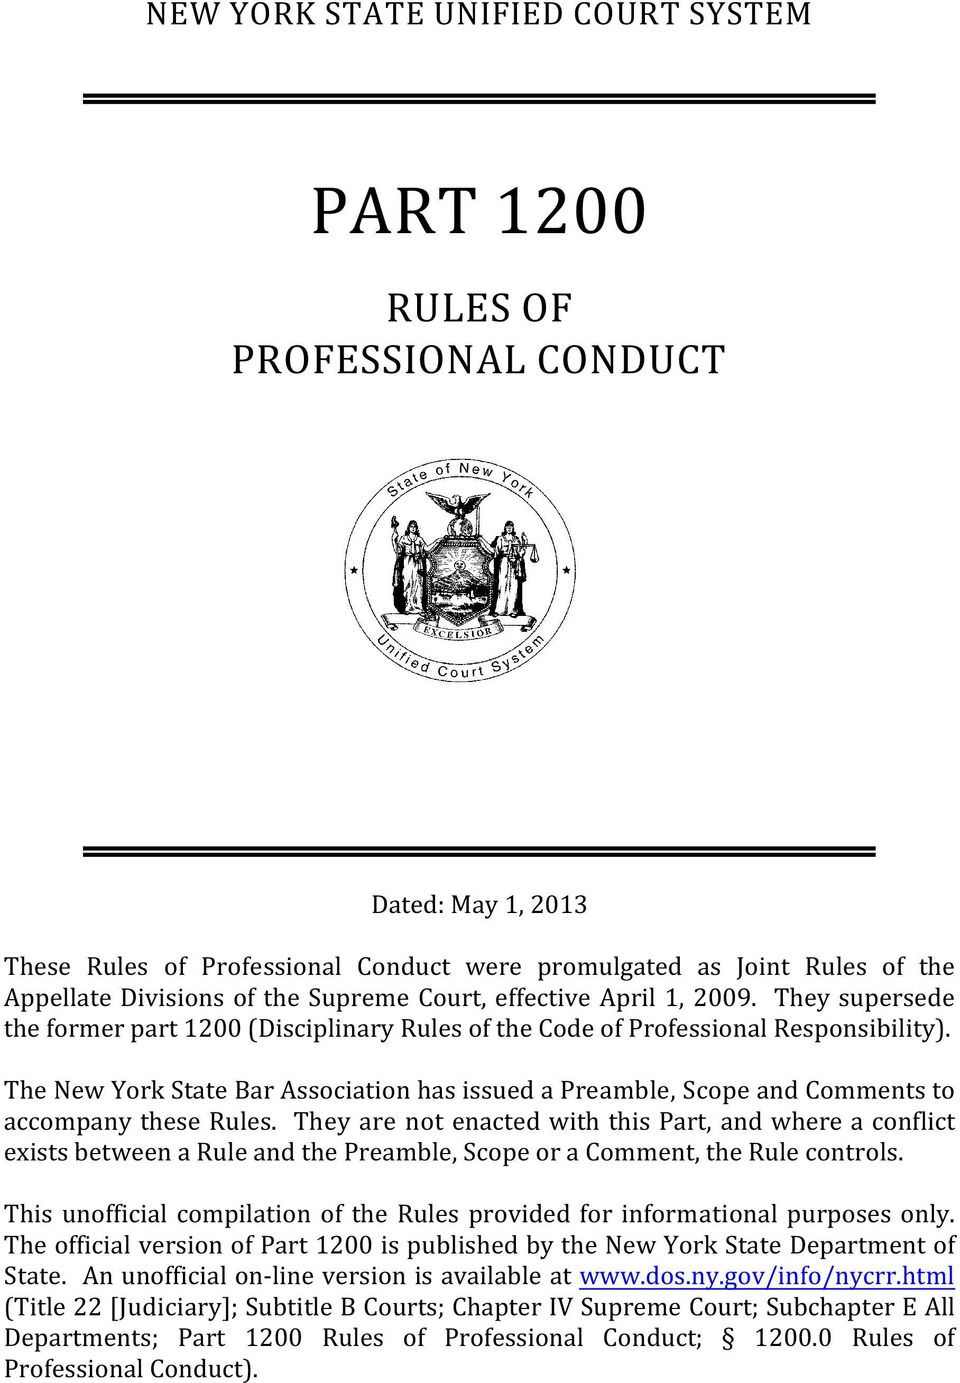 The New York State Bar Association has issued a Preamble, Scope and Comments to accompany these Rules.